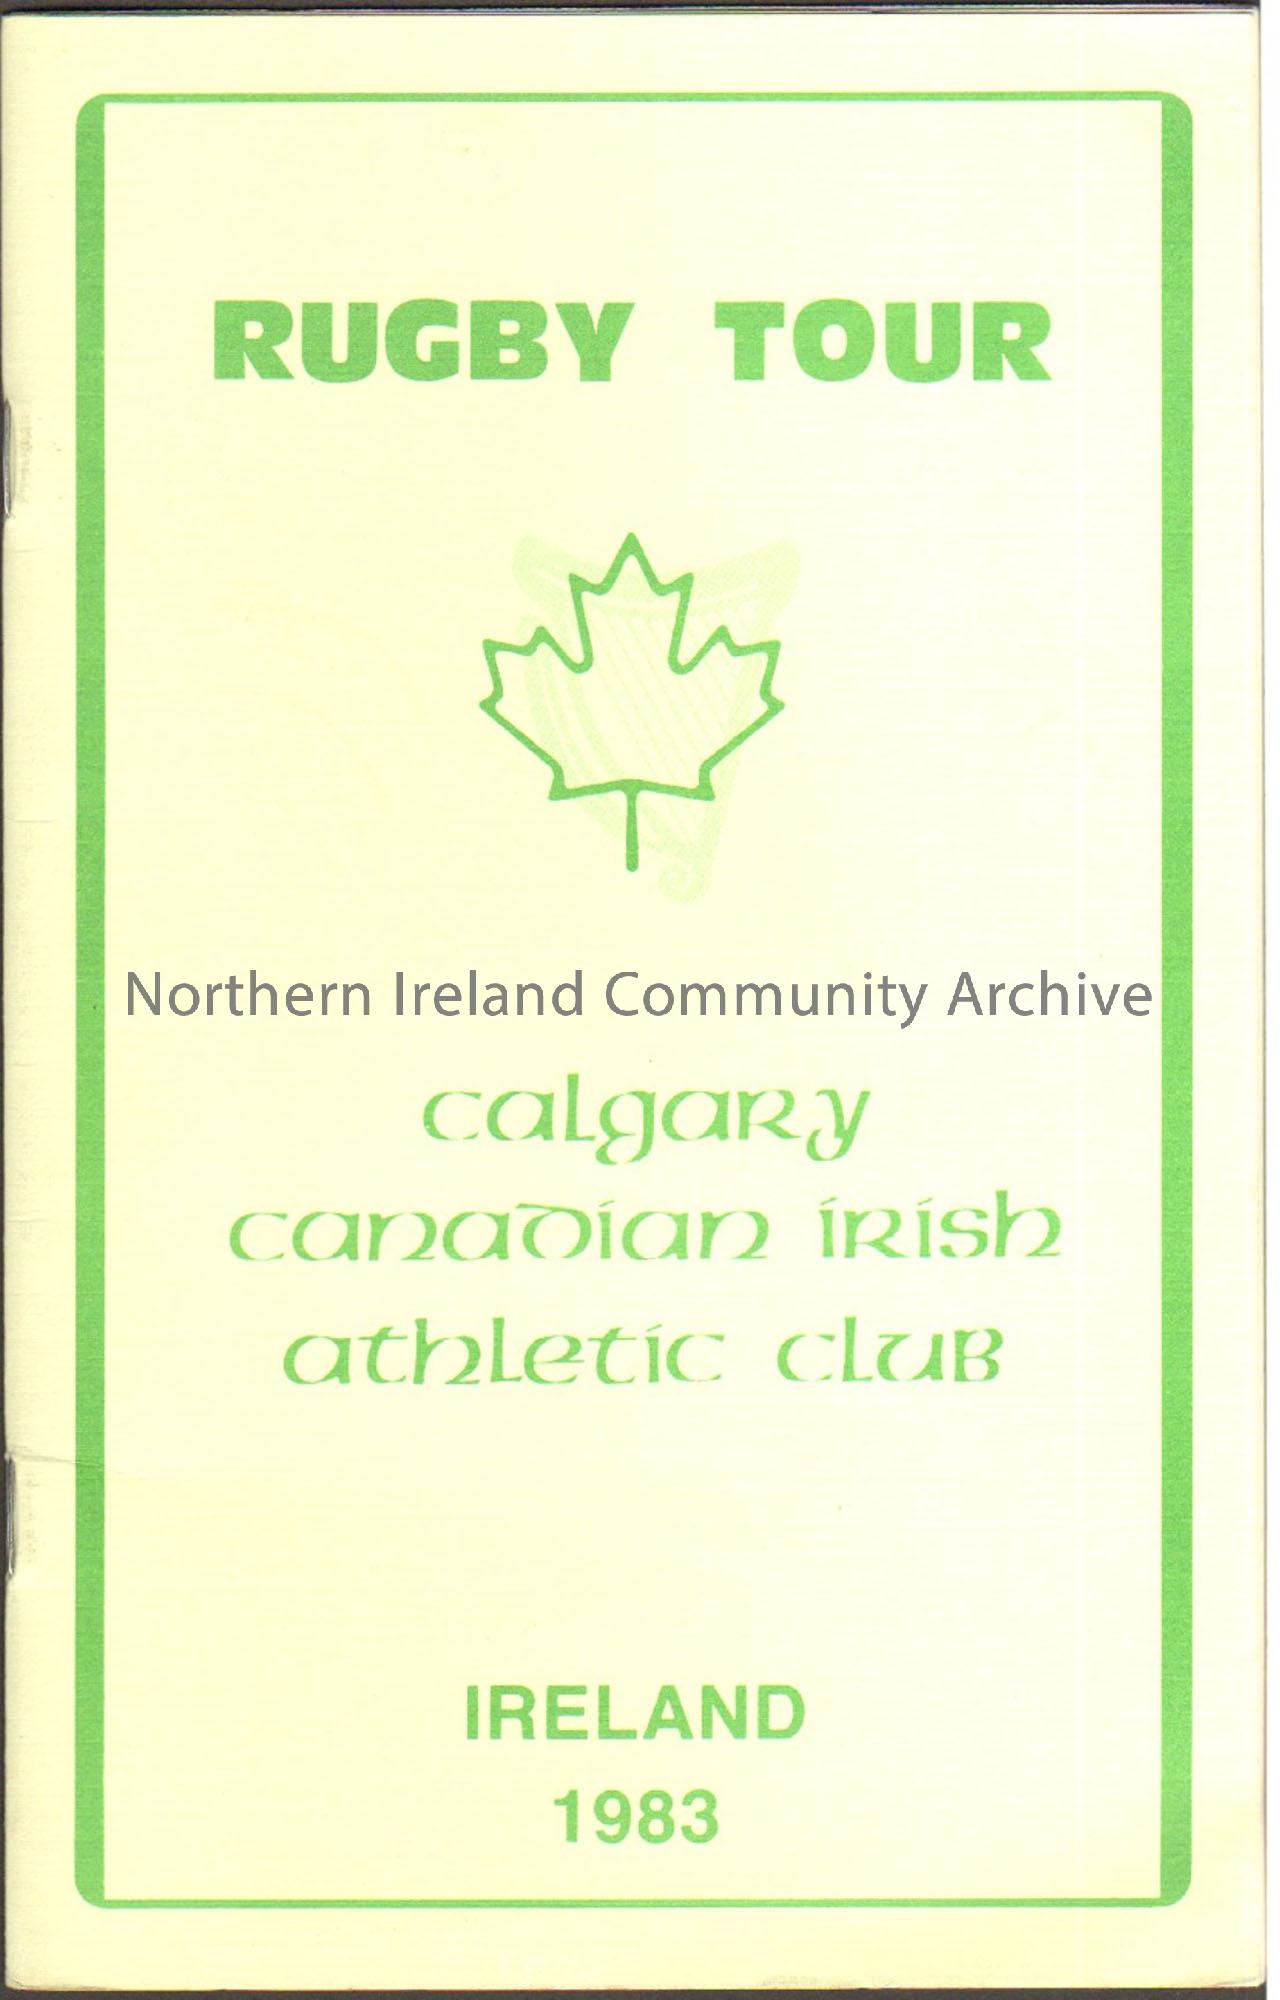 Rugby Tour, Calgary Canadian Irish Athletic Club, Ireland 1983. Light green programme with dark green writing and a maple leaf on the cover.